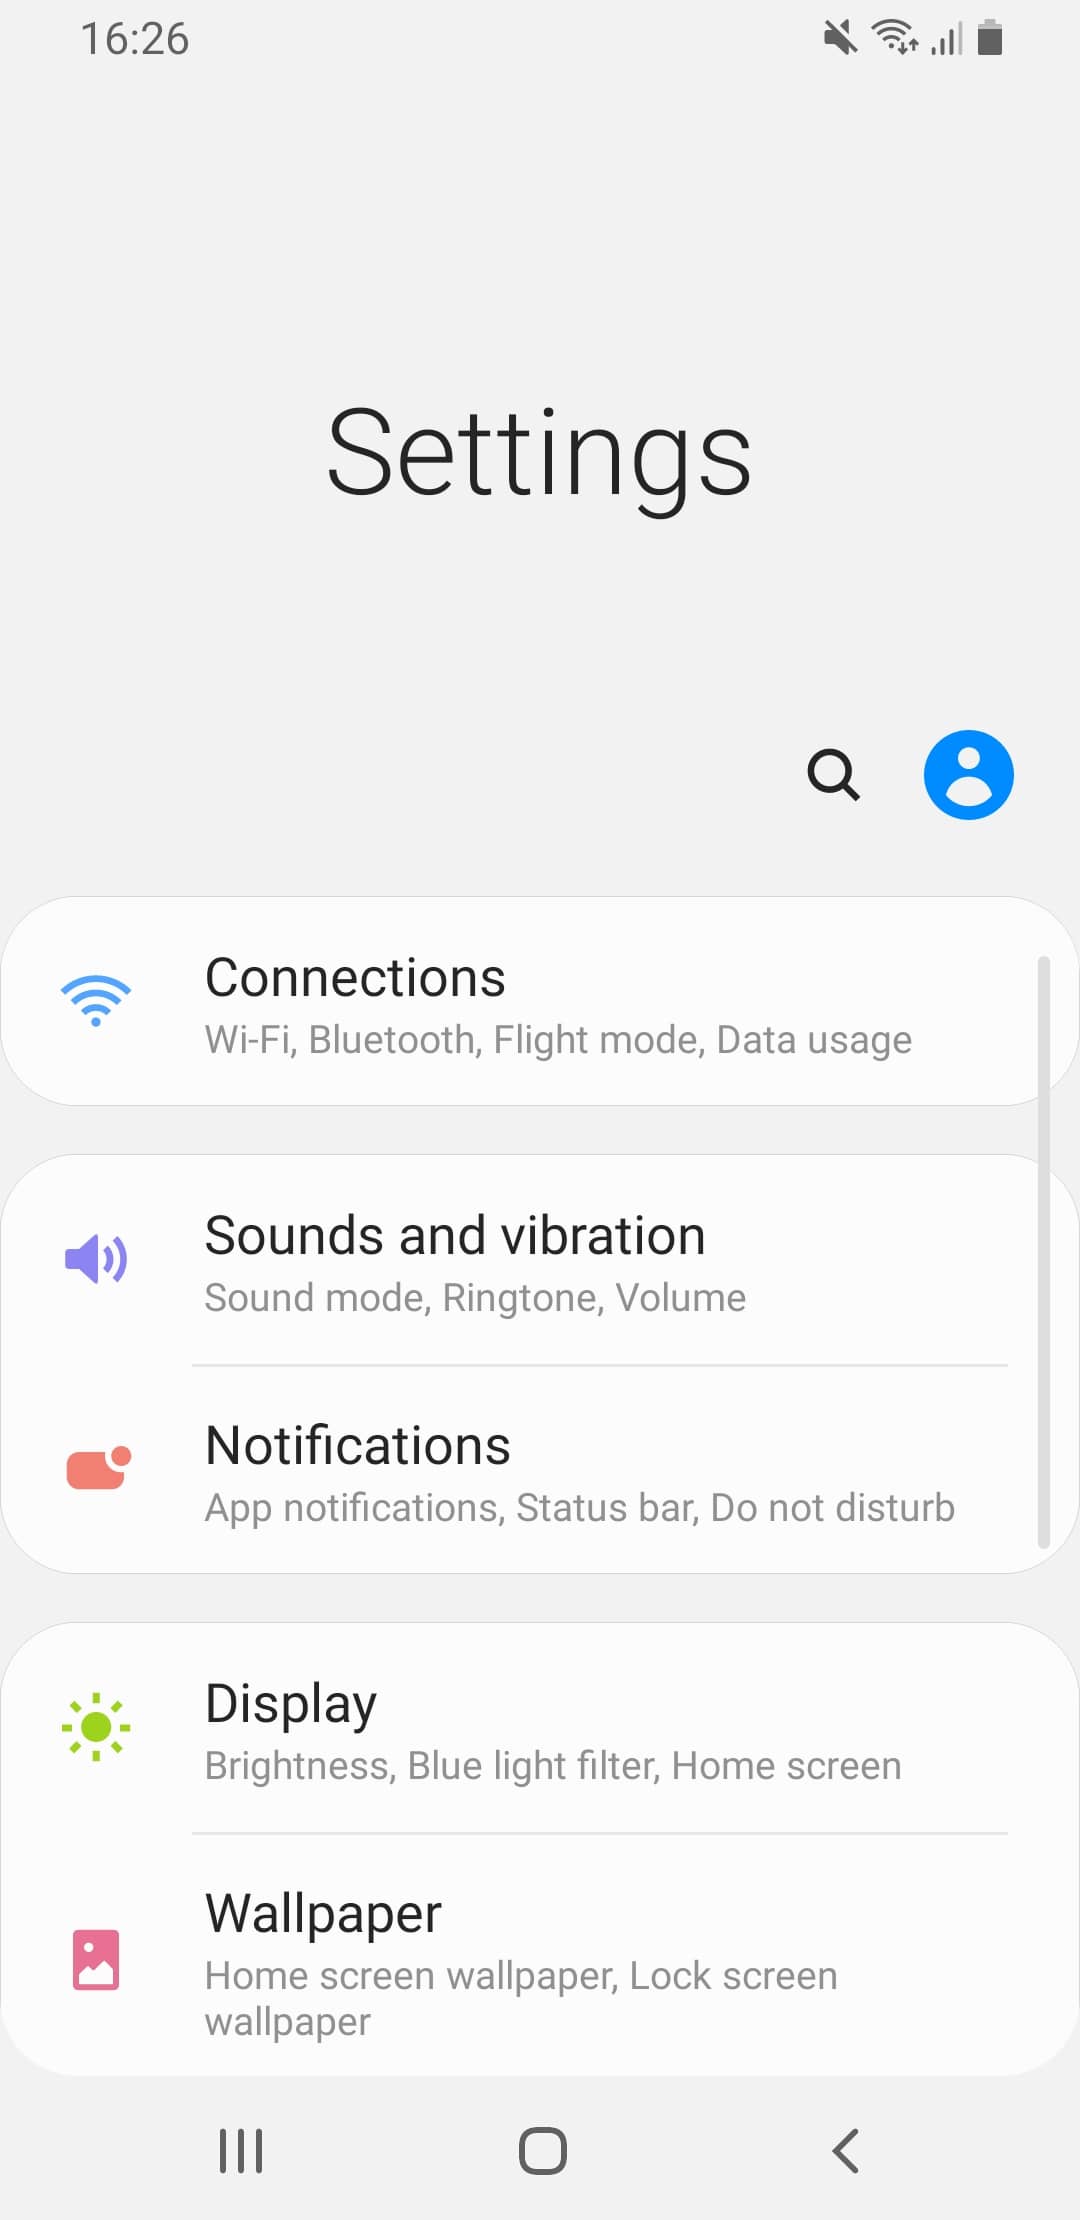 The main settings menu on Android OS